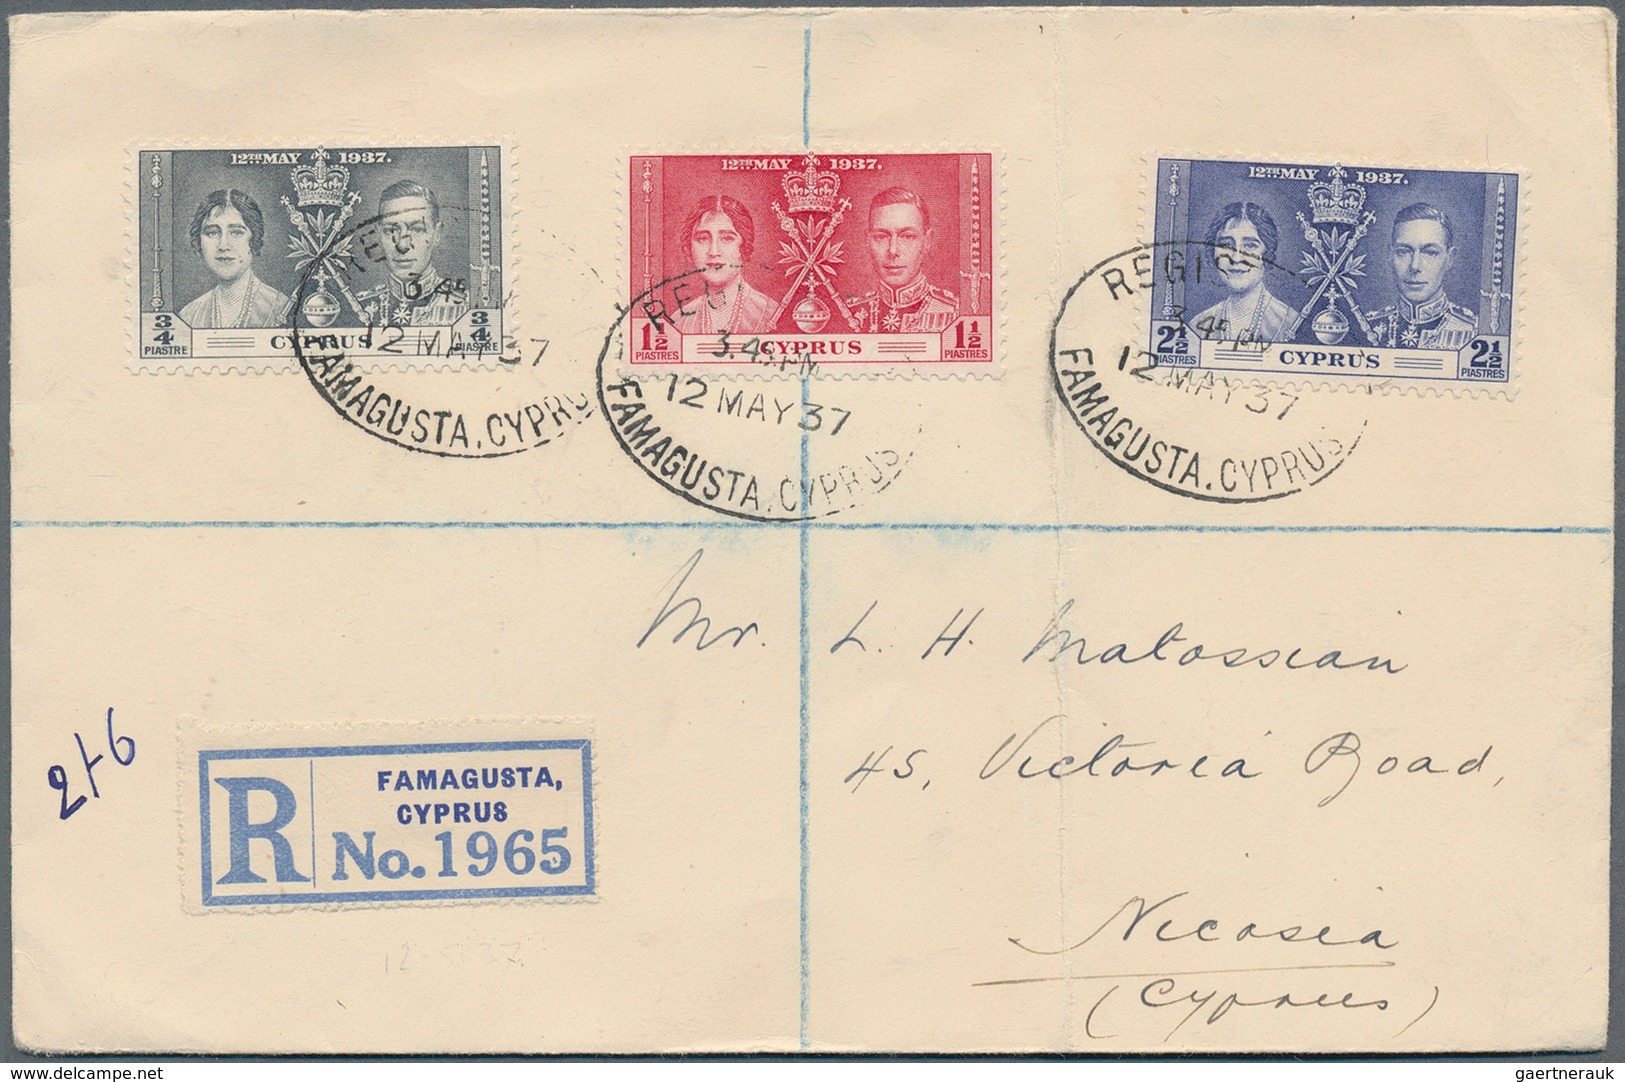 28528 Zypern: 1937/1957, KGVI, assortment of apprx. 115 (mainly commercial) covers, incl. registered and a